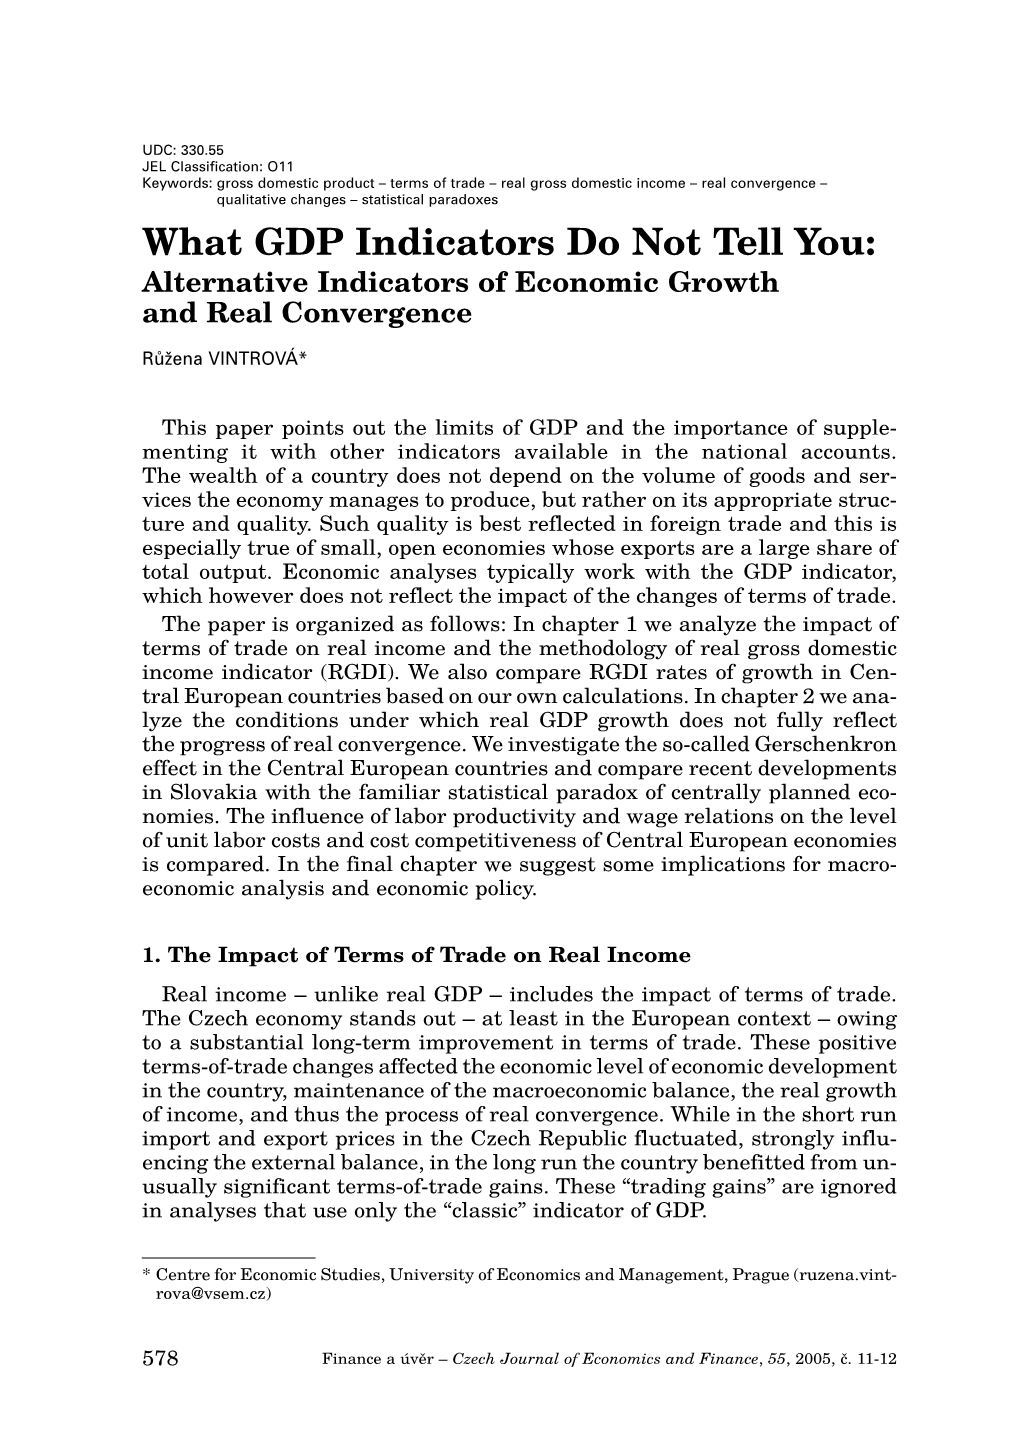 What GDP Indicators Do Not Tell You: Alternative Indicators of Economic Growth and Real Convergence